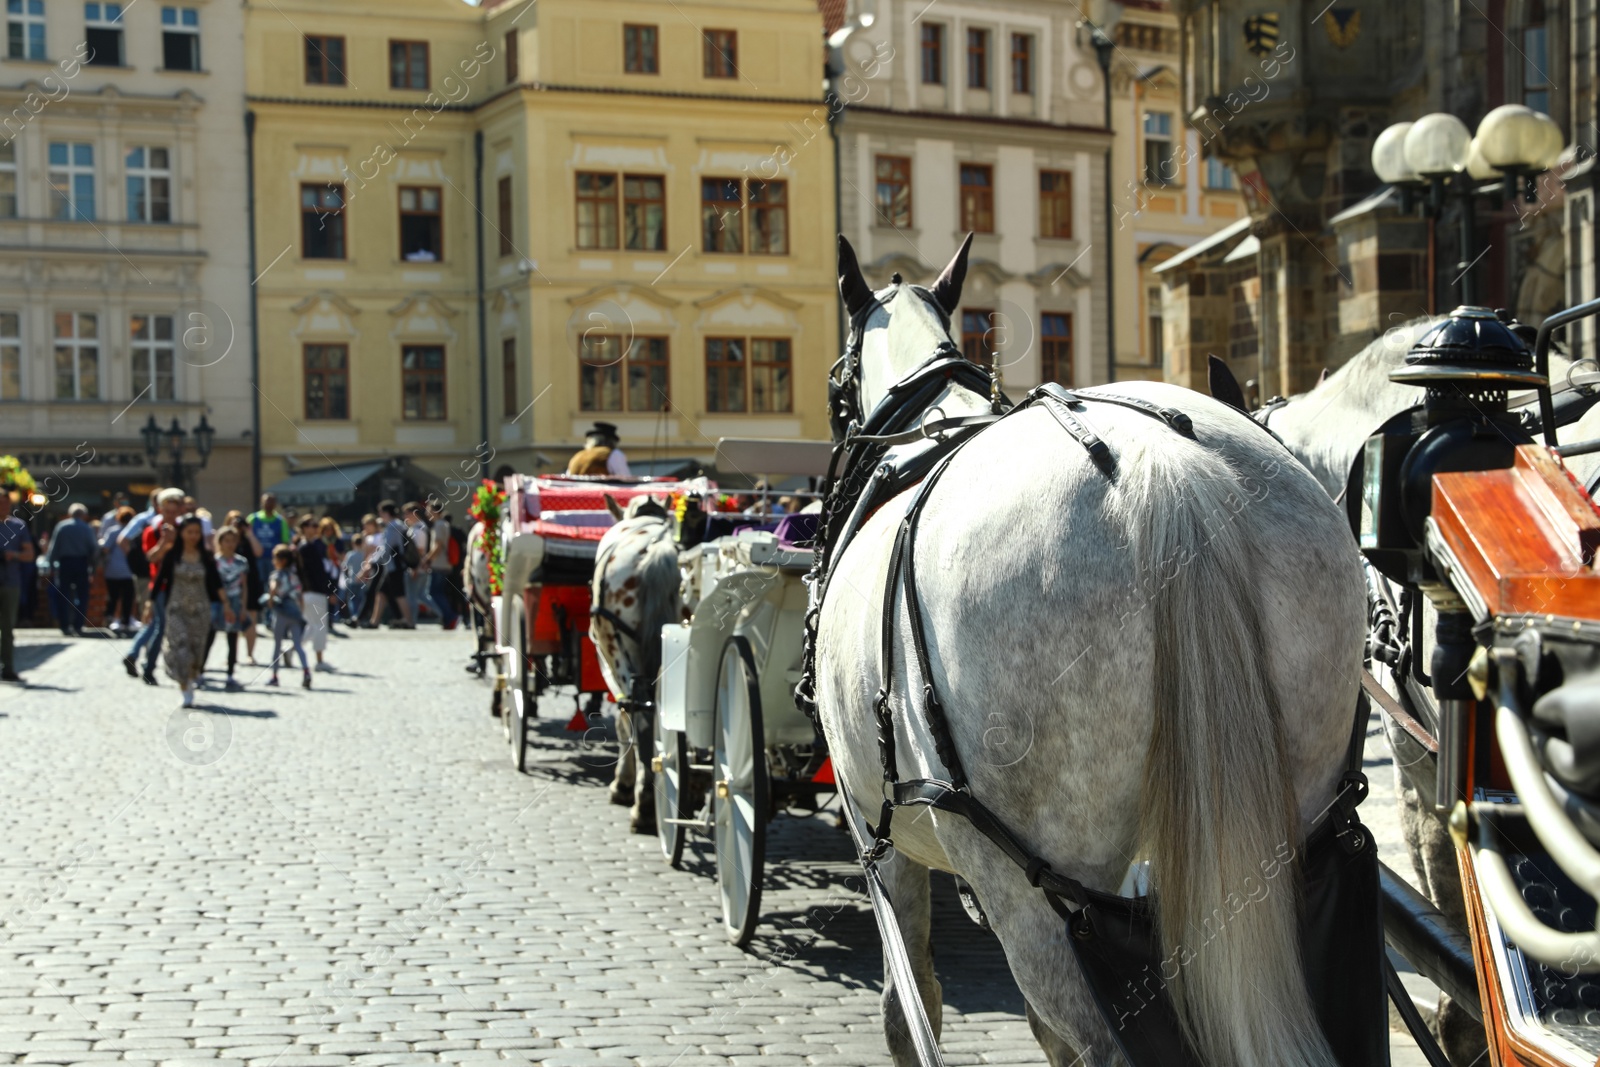 Photo of PRAGUE, CZECH REPUBLIC - APRIL 25, 2019: Harnessed horses with carriages on city street. Space for text